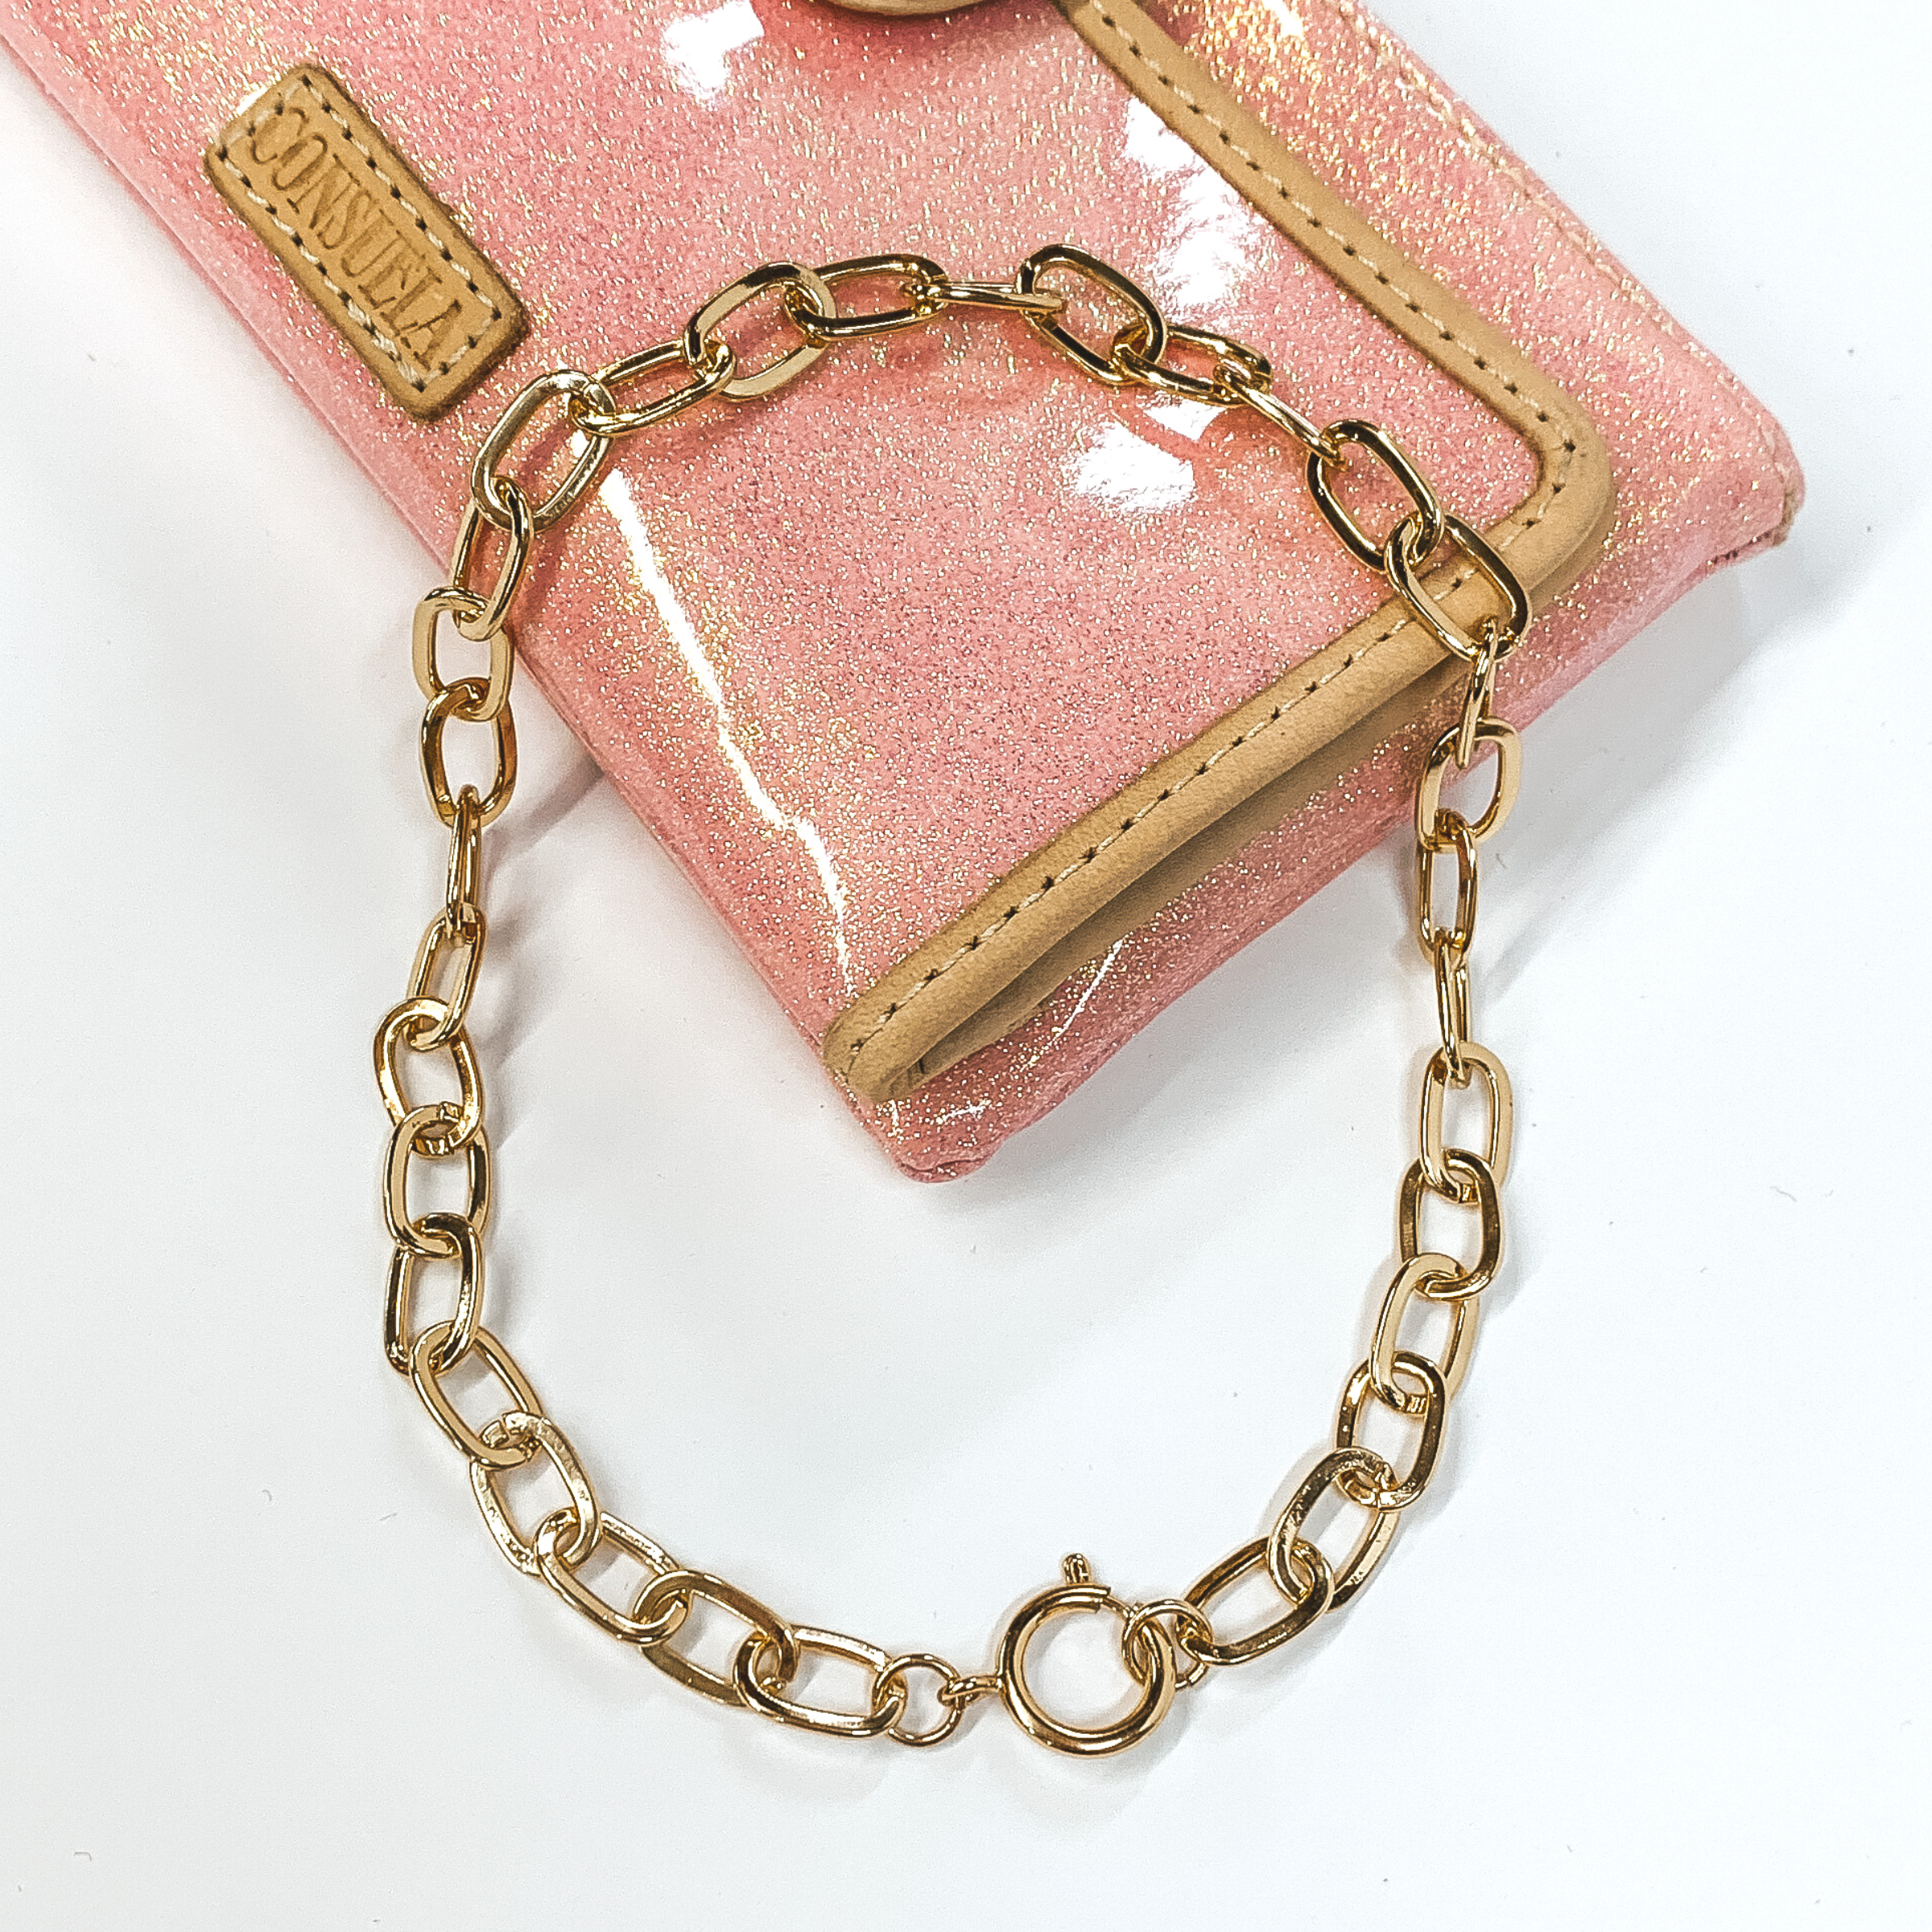 Paperclip gold chain necklace with a spring ring clasp. This necklace is pictured on a white and sparkle pink background. 